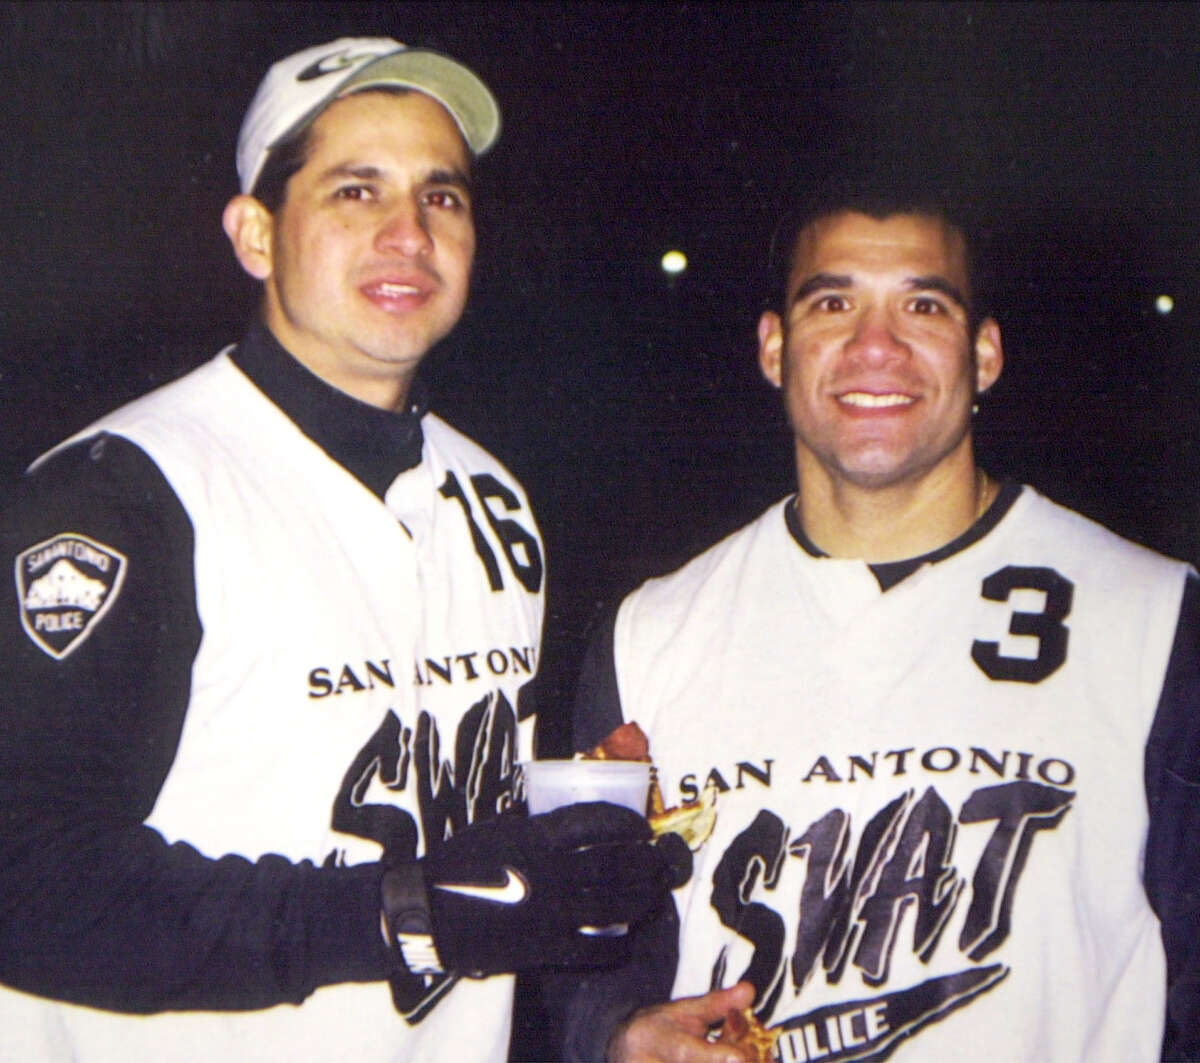 San Antonio Police Dept. SWAT team members John "Rocky" Riojas (right) is seen with his partner Joe Obregon in this undated photo. When Riojas was killed, he left behind a wife, Sandra, a daughter, Victoria, and a son, John Michael, according to Express-News reports.